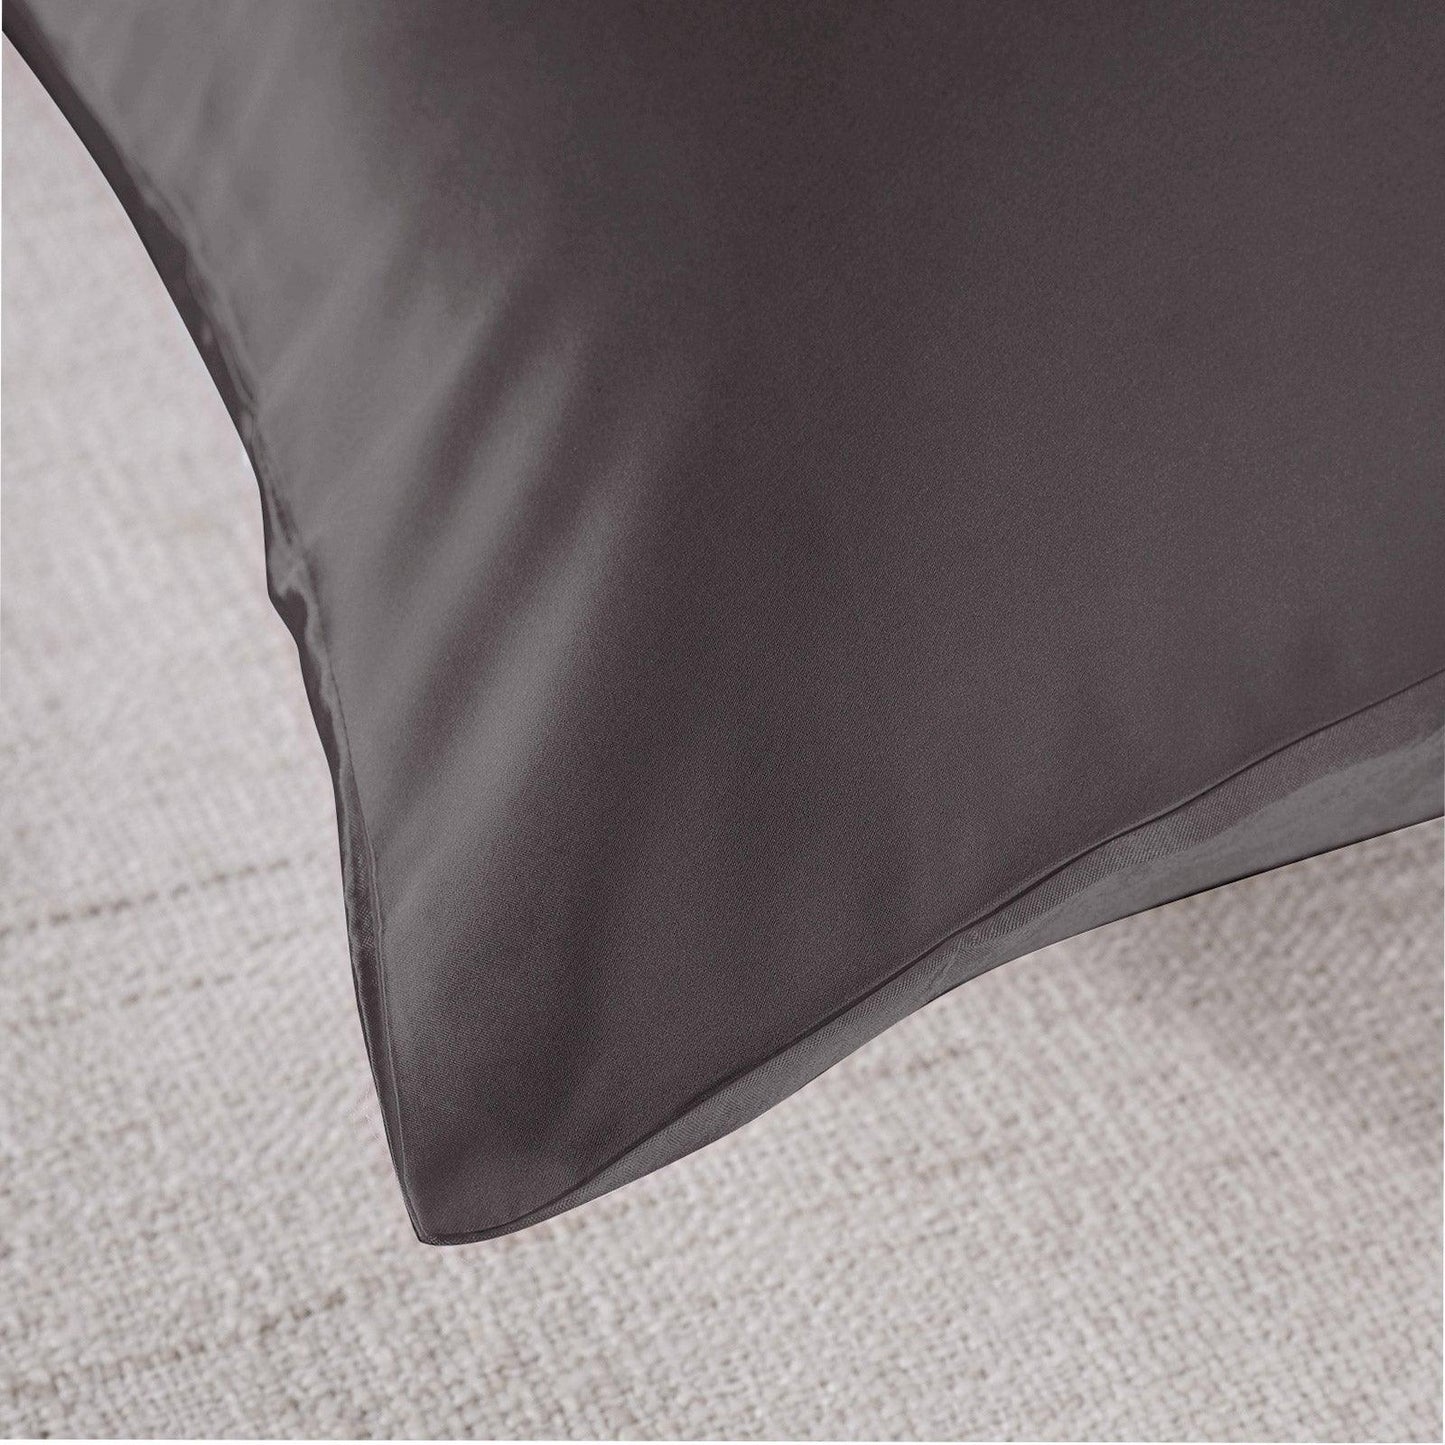 Royal Comfort Mulberry Soft Silk Hypoallergenic Pillowcase Twin Pack 51 x 76cm - Charcoal